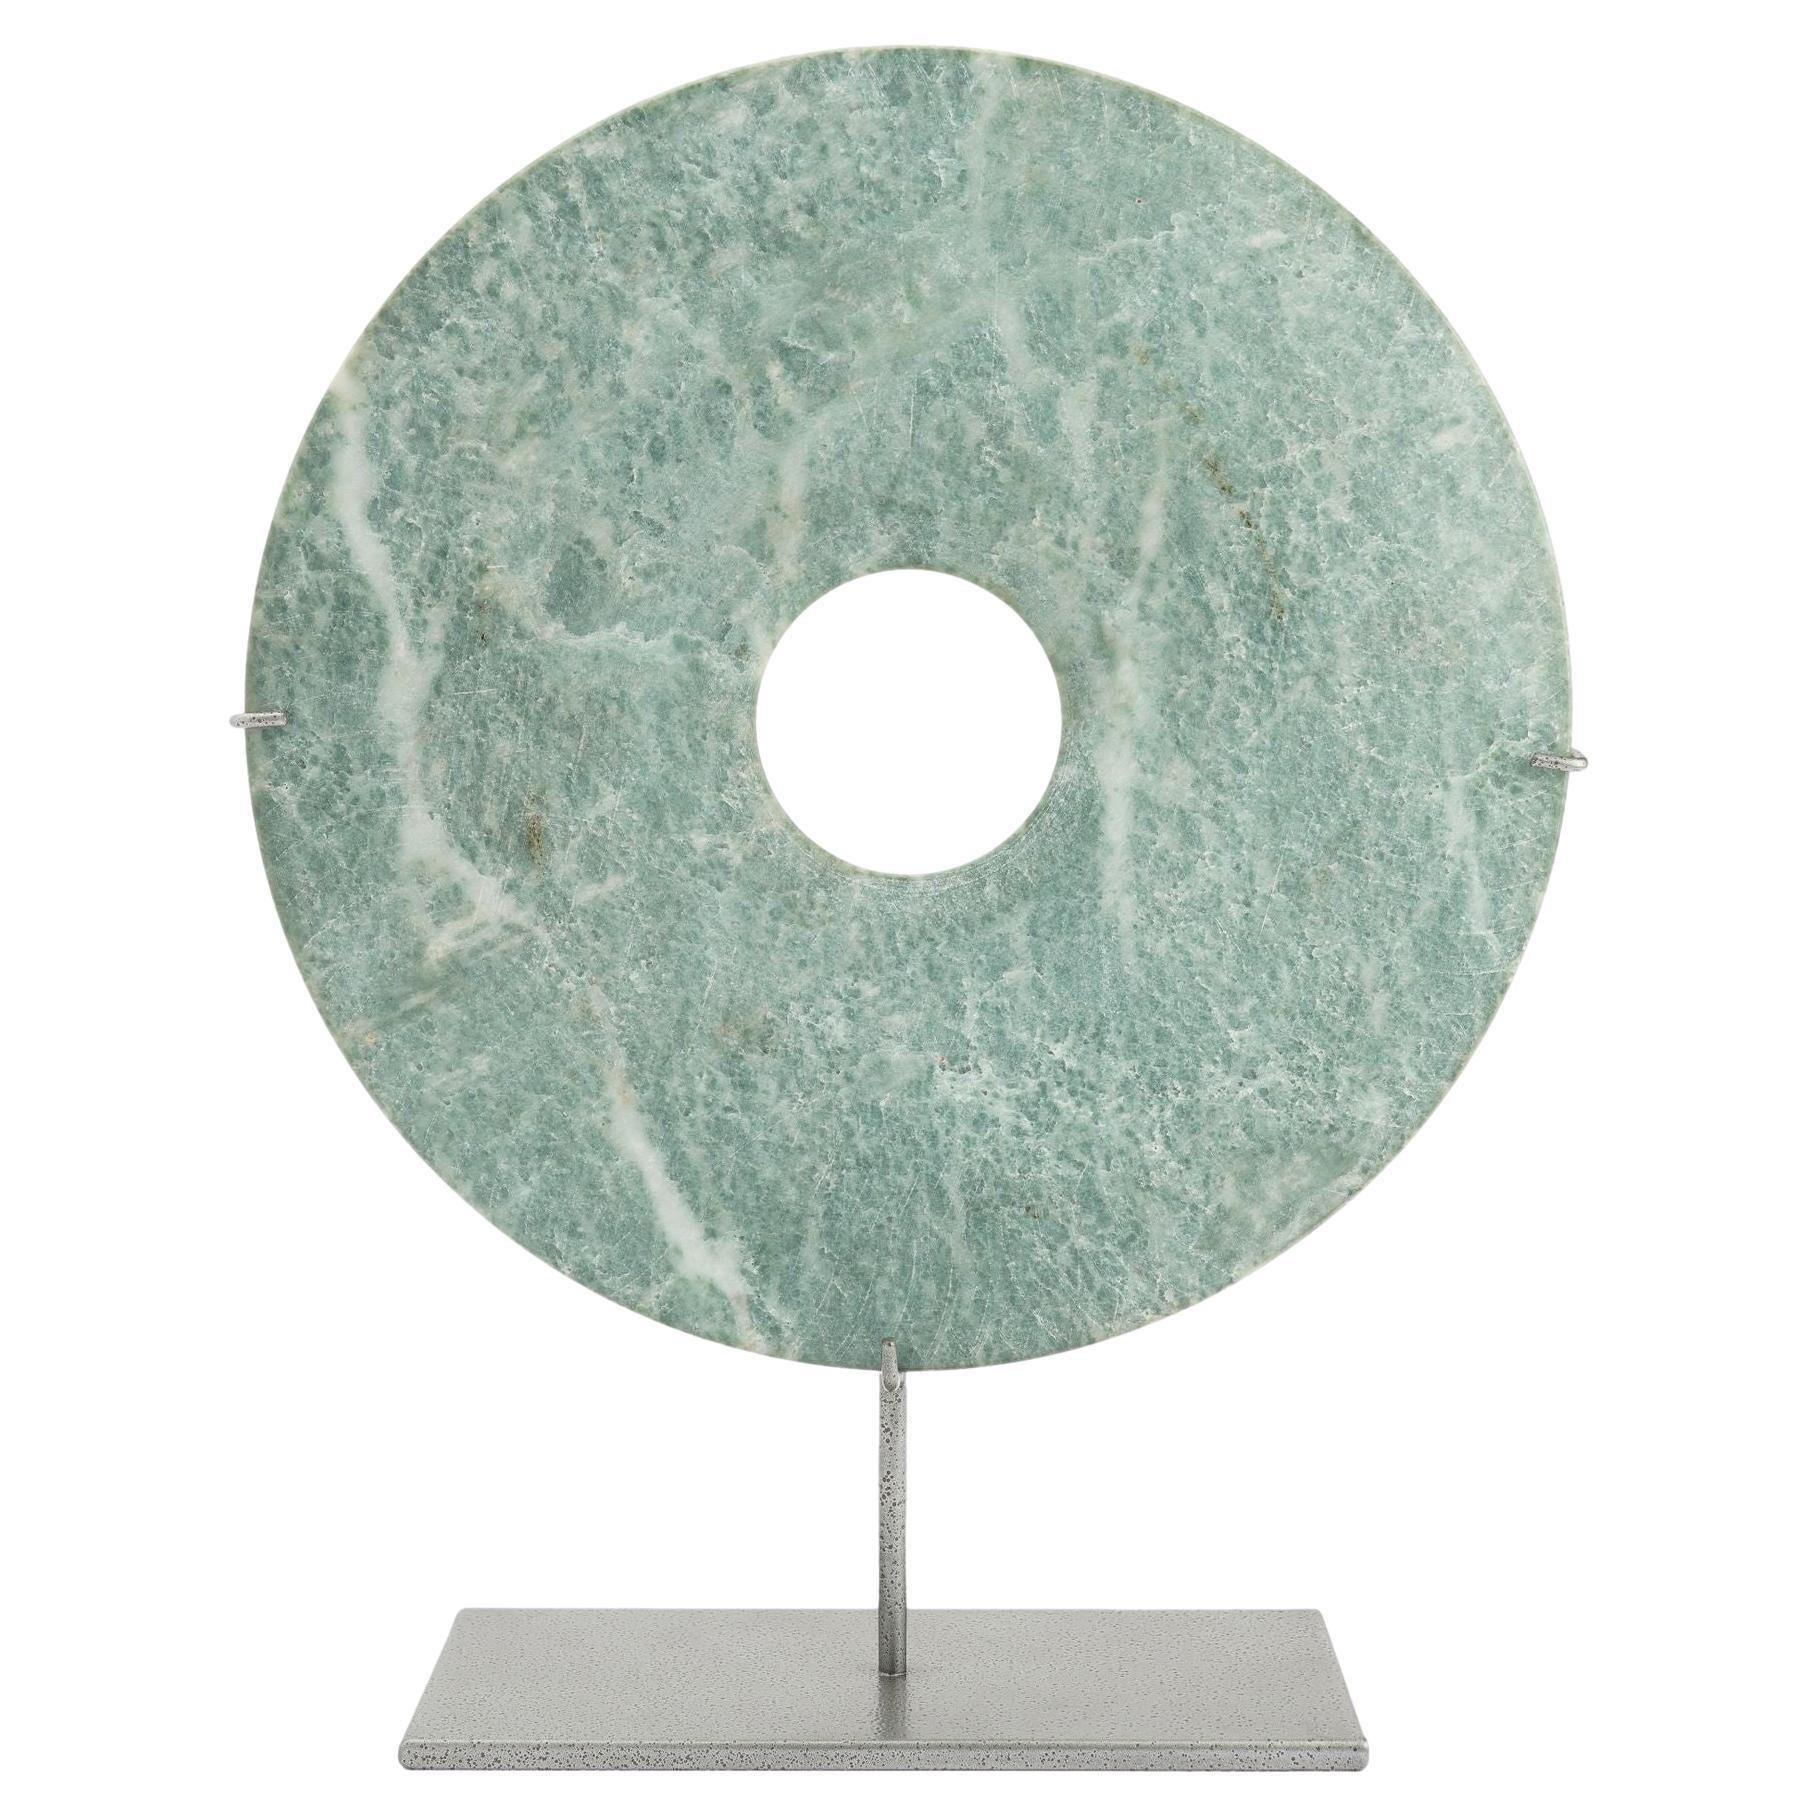 Which dynasty is known for bi discs of jade?